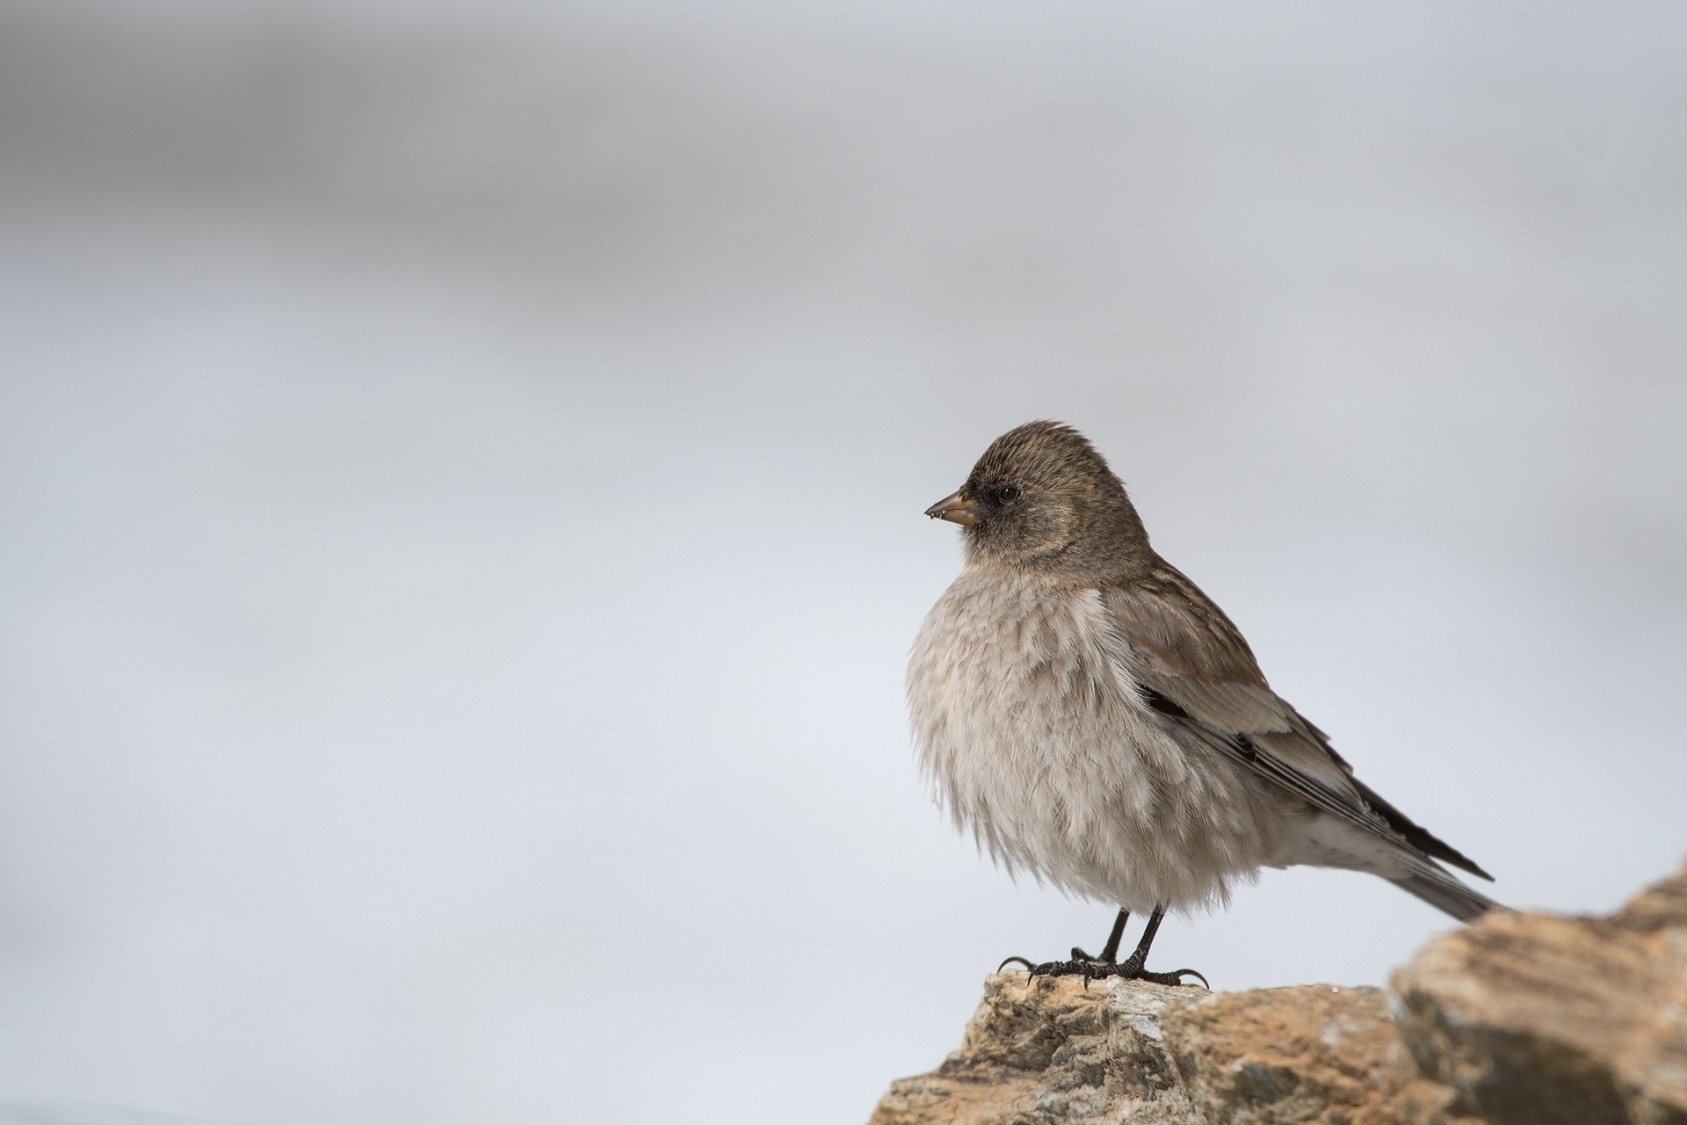 Brandt’s Mountain Finches (Leucosticte brandti) are often seen in these parts.